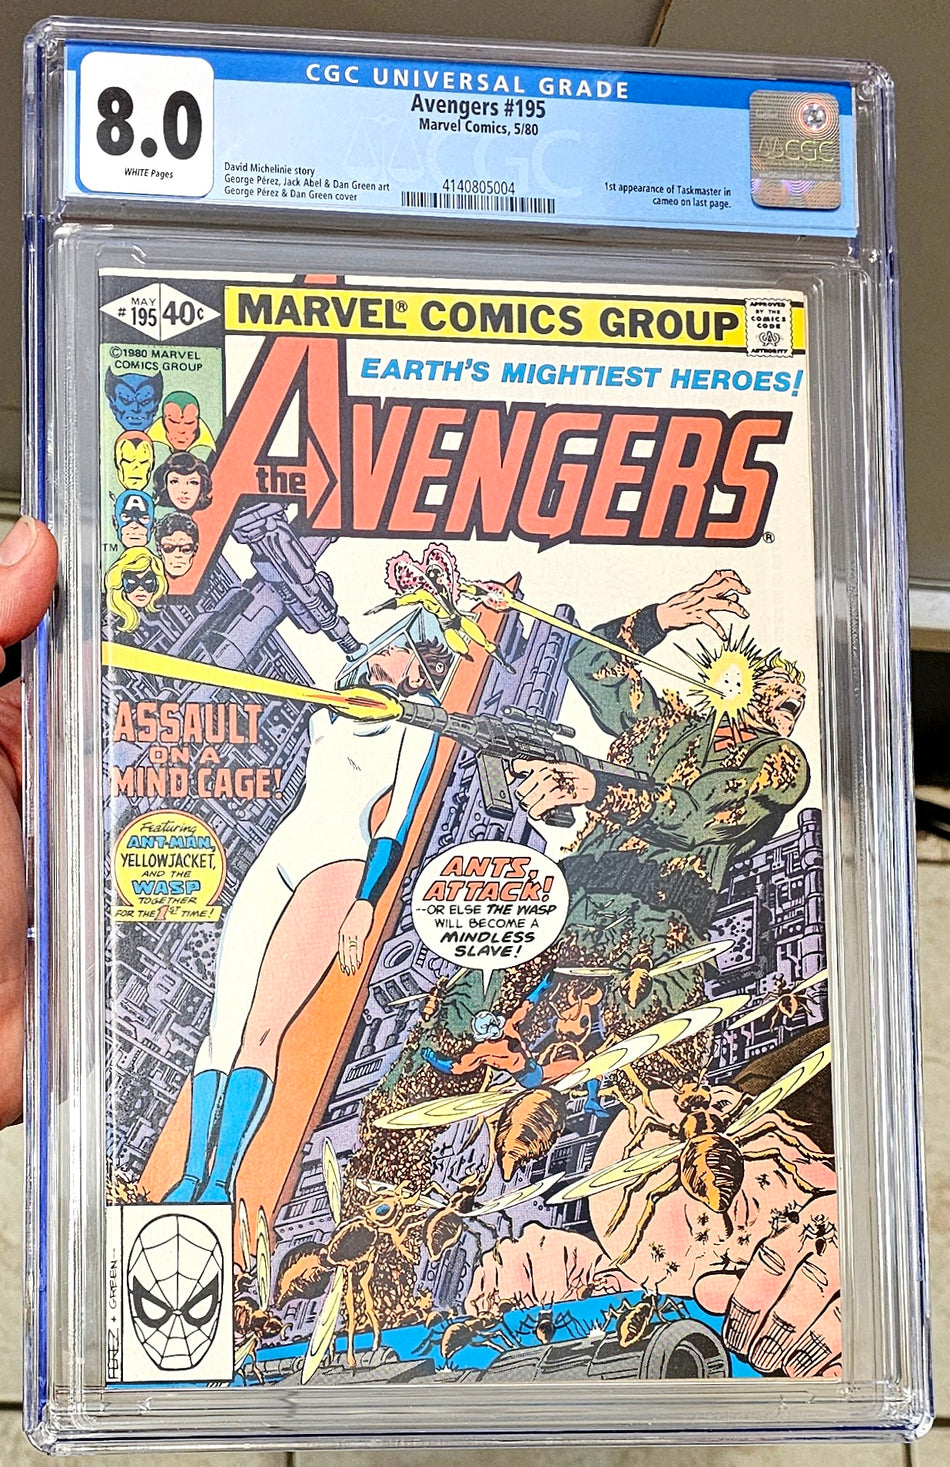 Avengers #195 (1980) CGC 8.0 (1st Appearance of Taskmaster in Cameo)